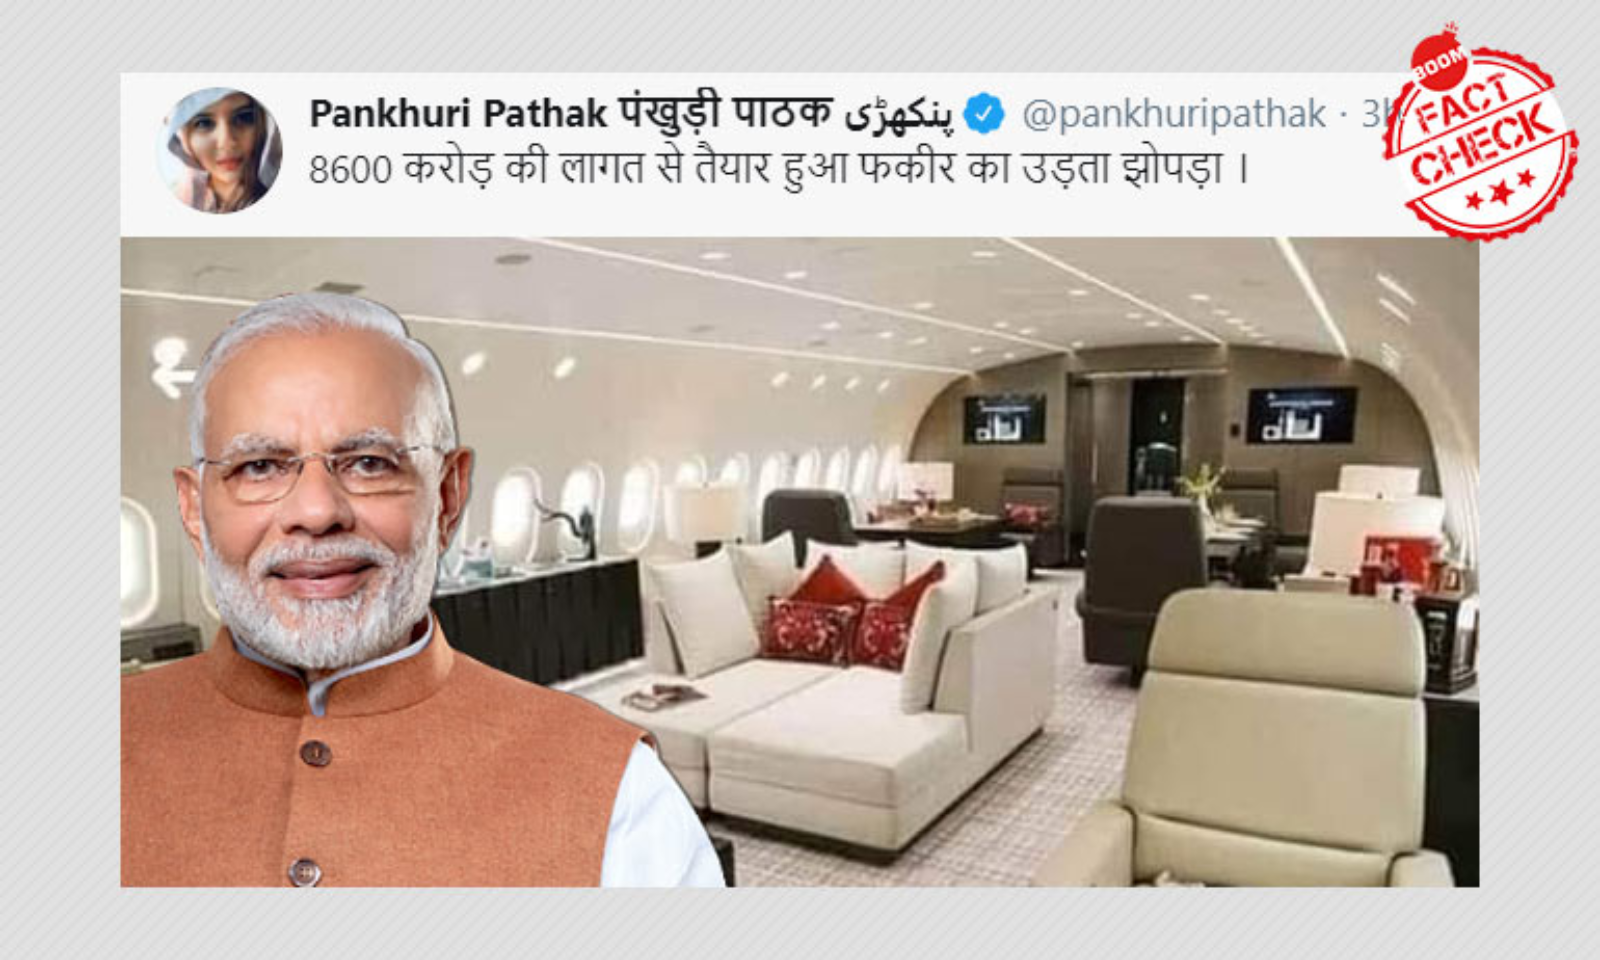 Old image of Boeing 787 shared by Congress leaders as Boeing 777